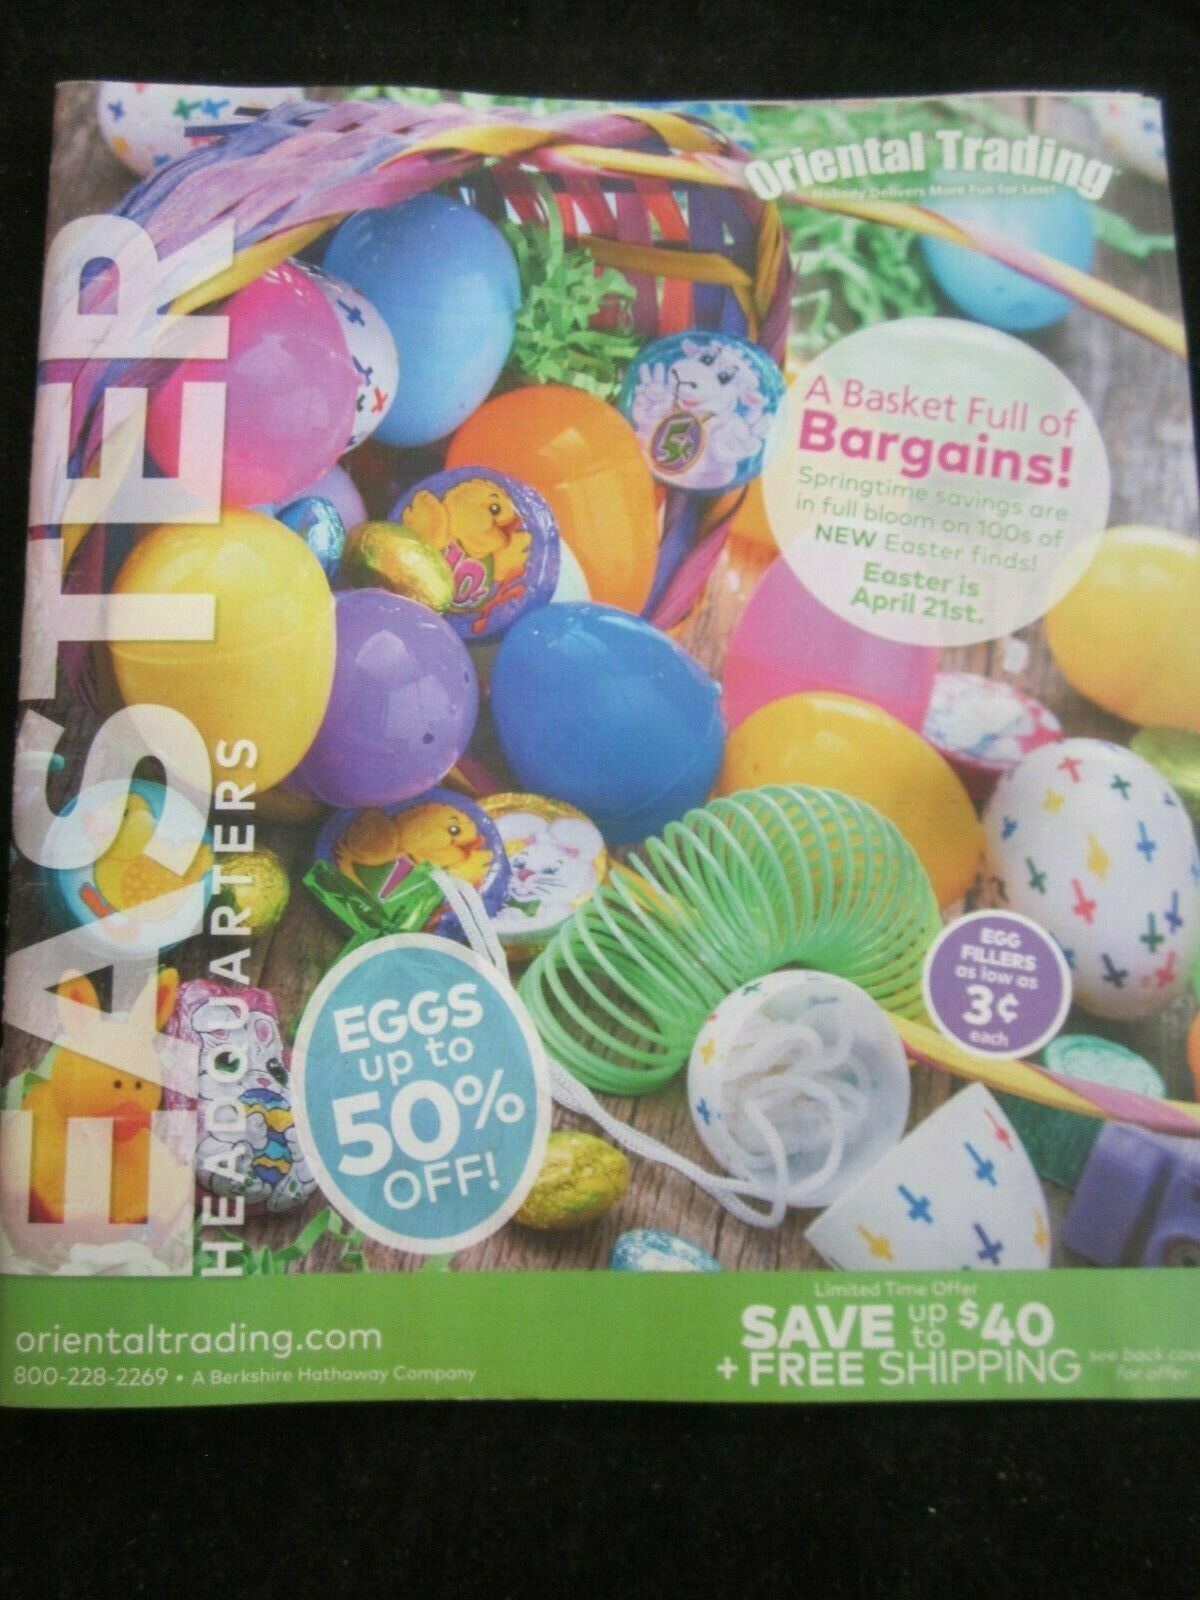 Primary image for Oriental Trading Catalog 2019 Easter Headquarters Basket Full of Bargains New